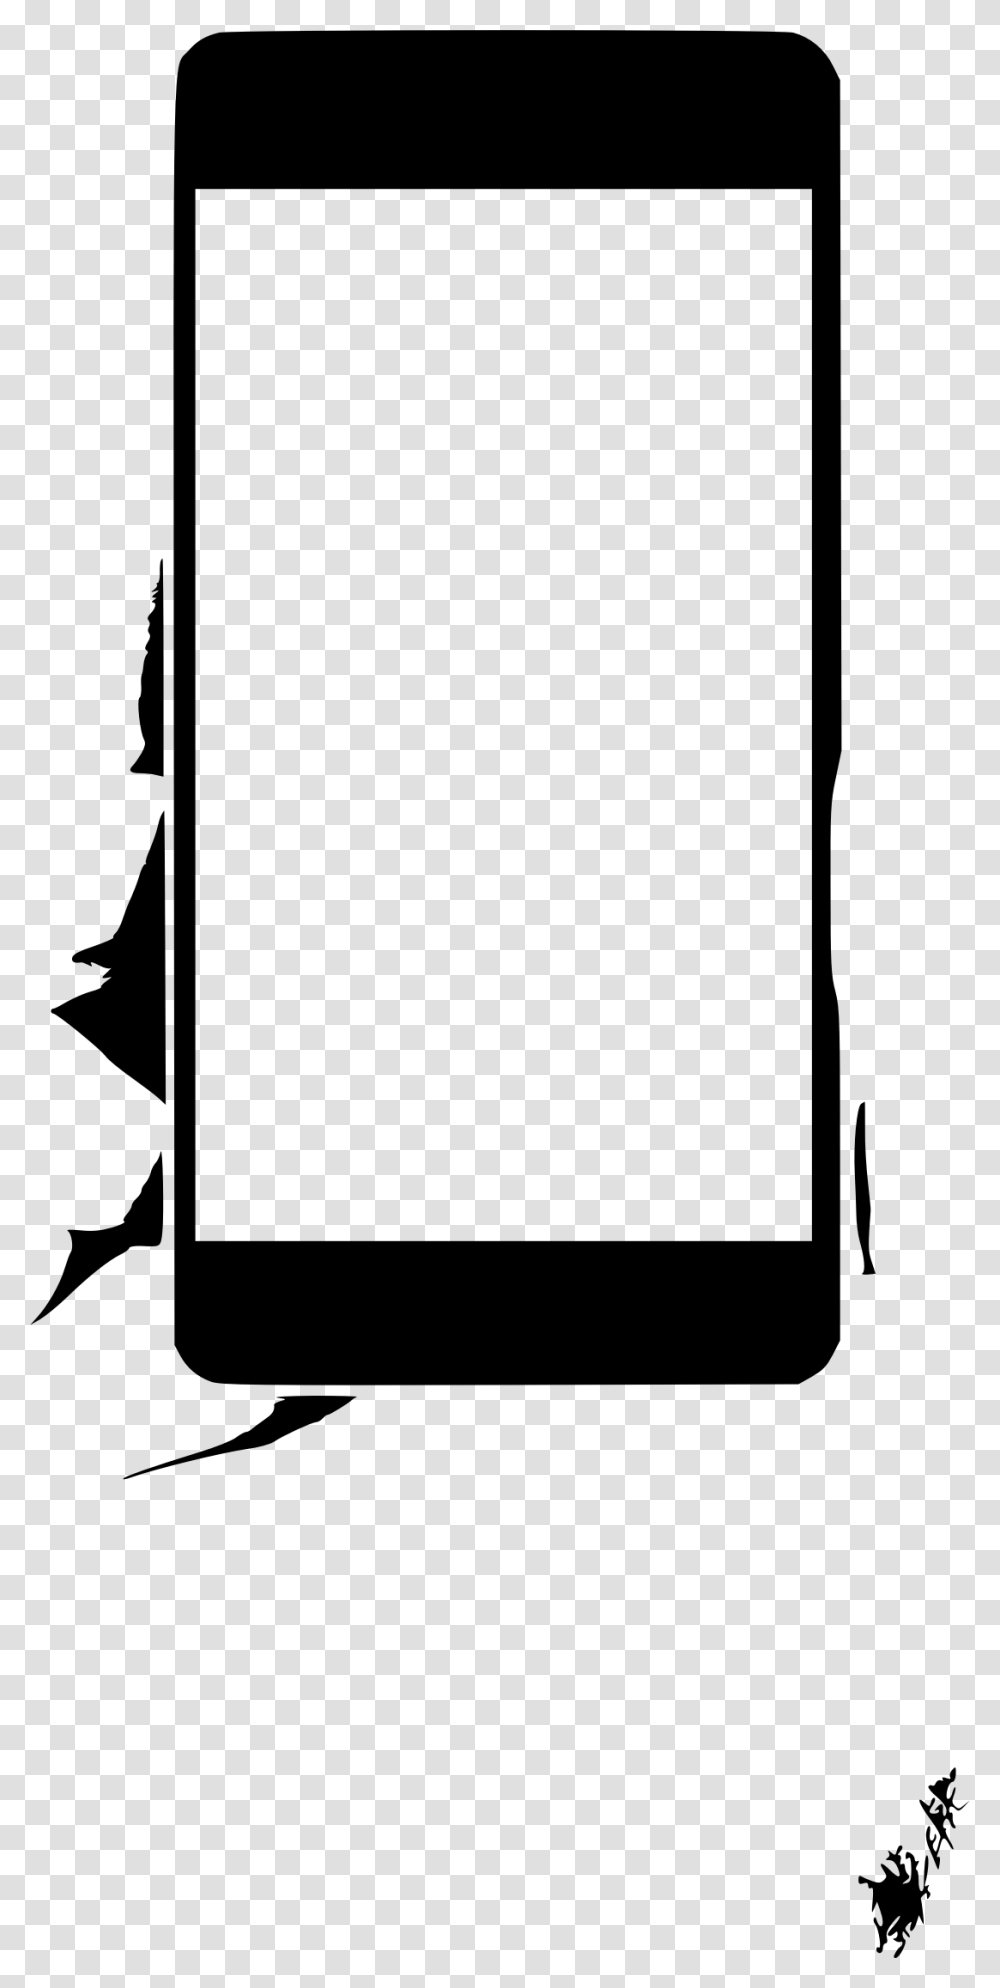 Mobile In Hand Clip Arts Bubble Chat Wa Iphone, Gray, World Of Warcraft Transparent Png